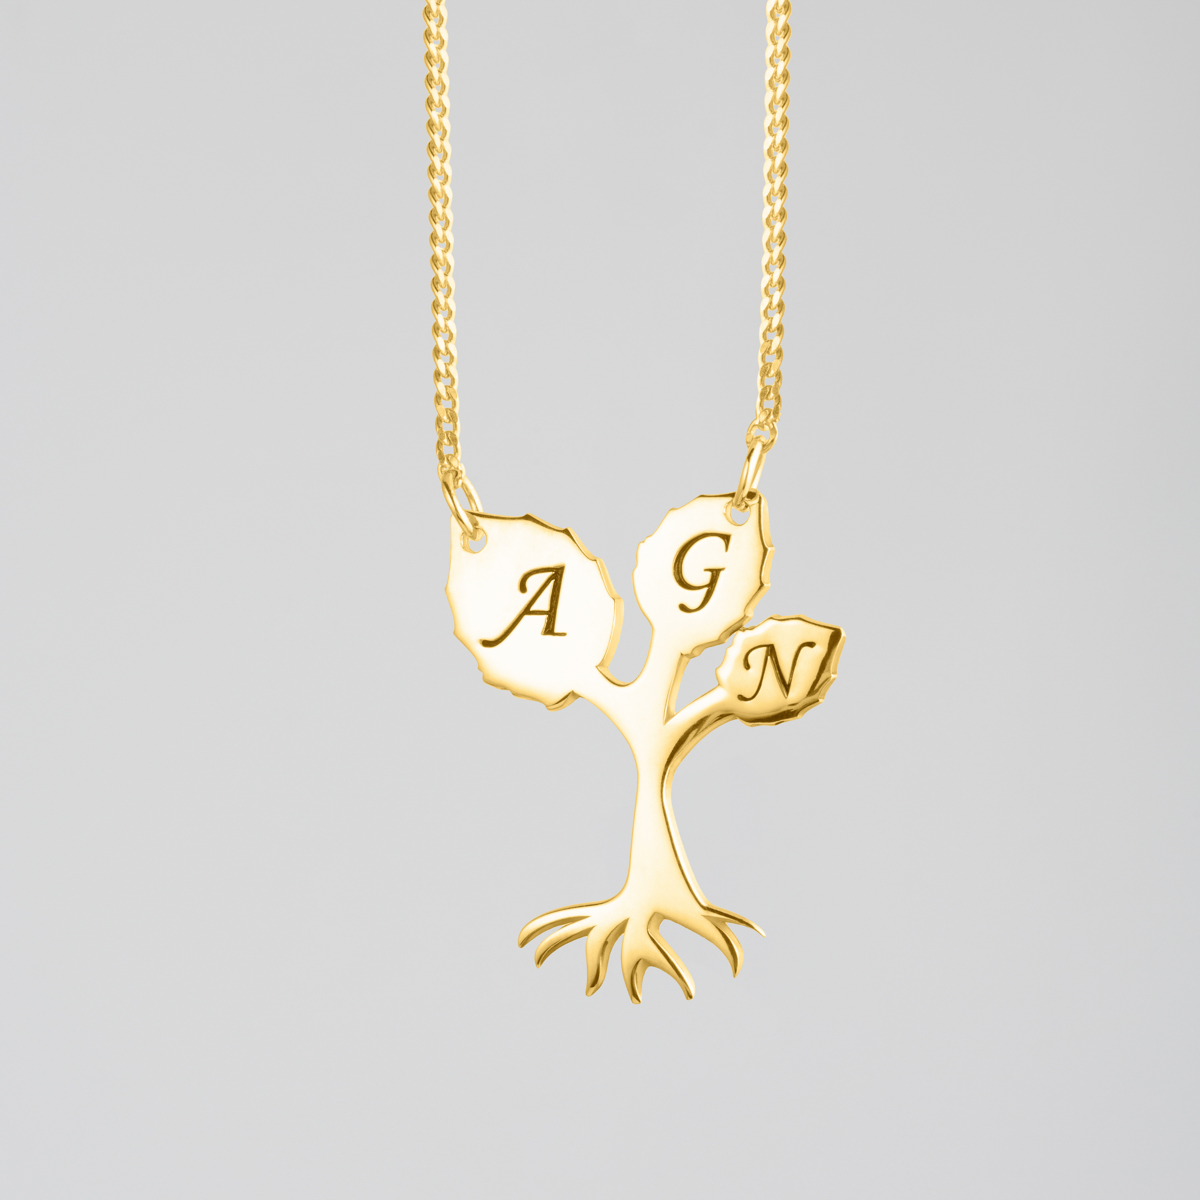 Buy Tree Design with Name Customized Name Necklace Pendants | yourPrint